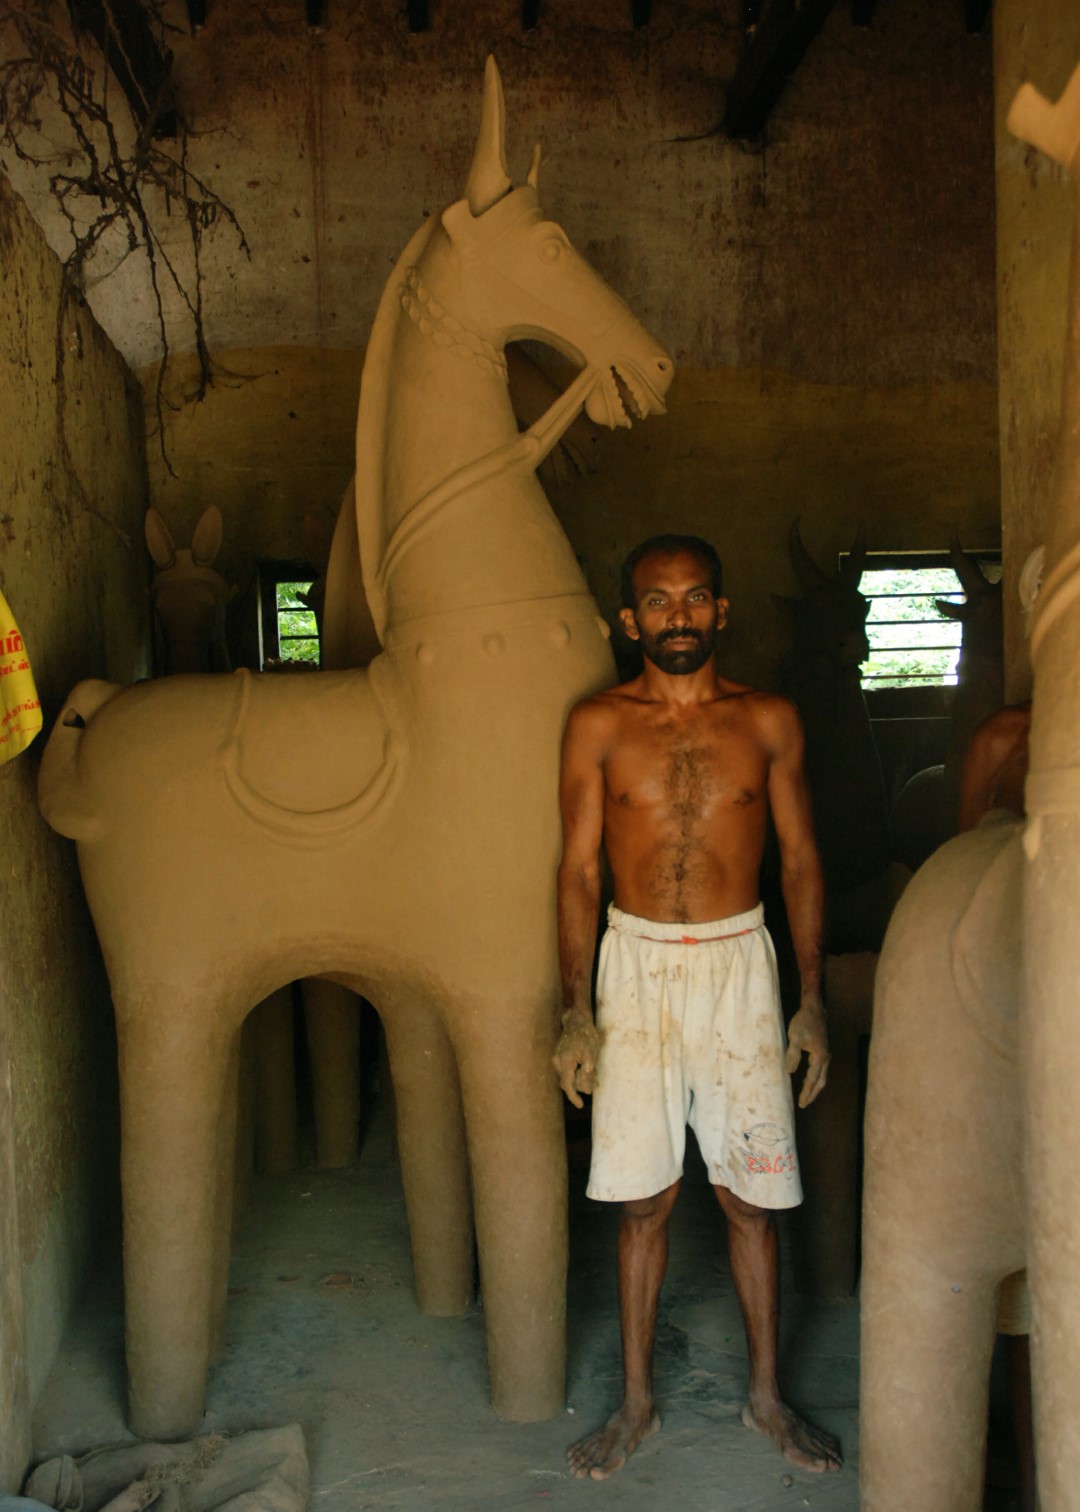 <span style="font-weight:normal;">Jaganathan is the head potter for the festival at Alianeley. The <i>ure-kuthirai</i> (village horse) he has just finished modelling for the annual festival, towers above him in the shelter of his workshop. The horse will dry for more than a week before Jaganathan brings it into the oven to be fired.</span>